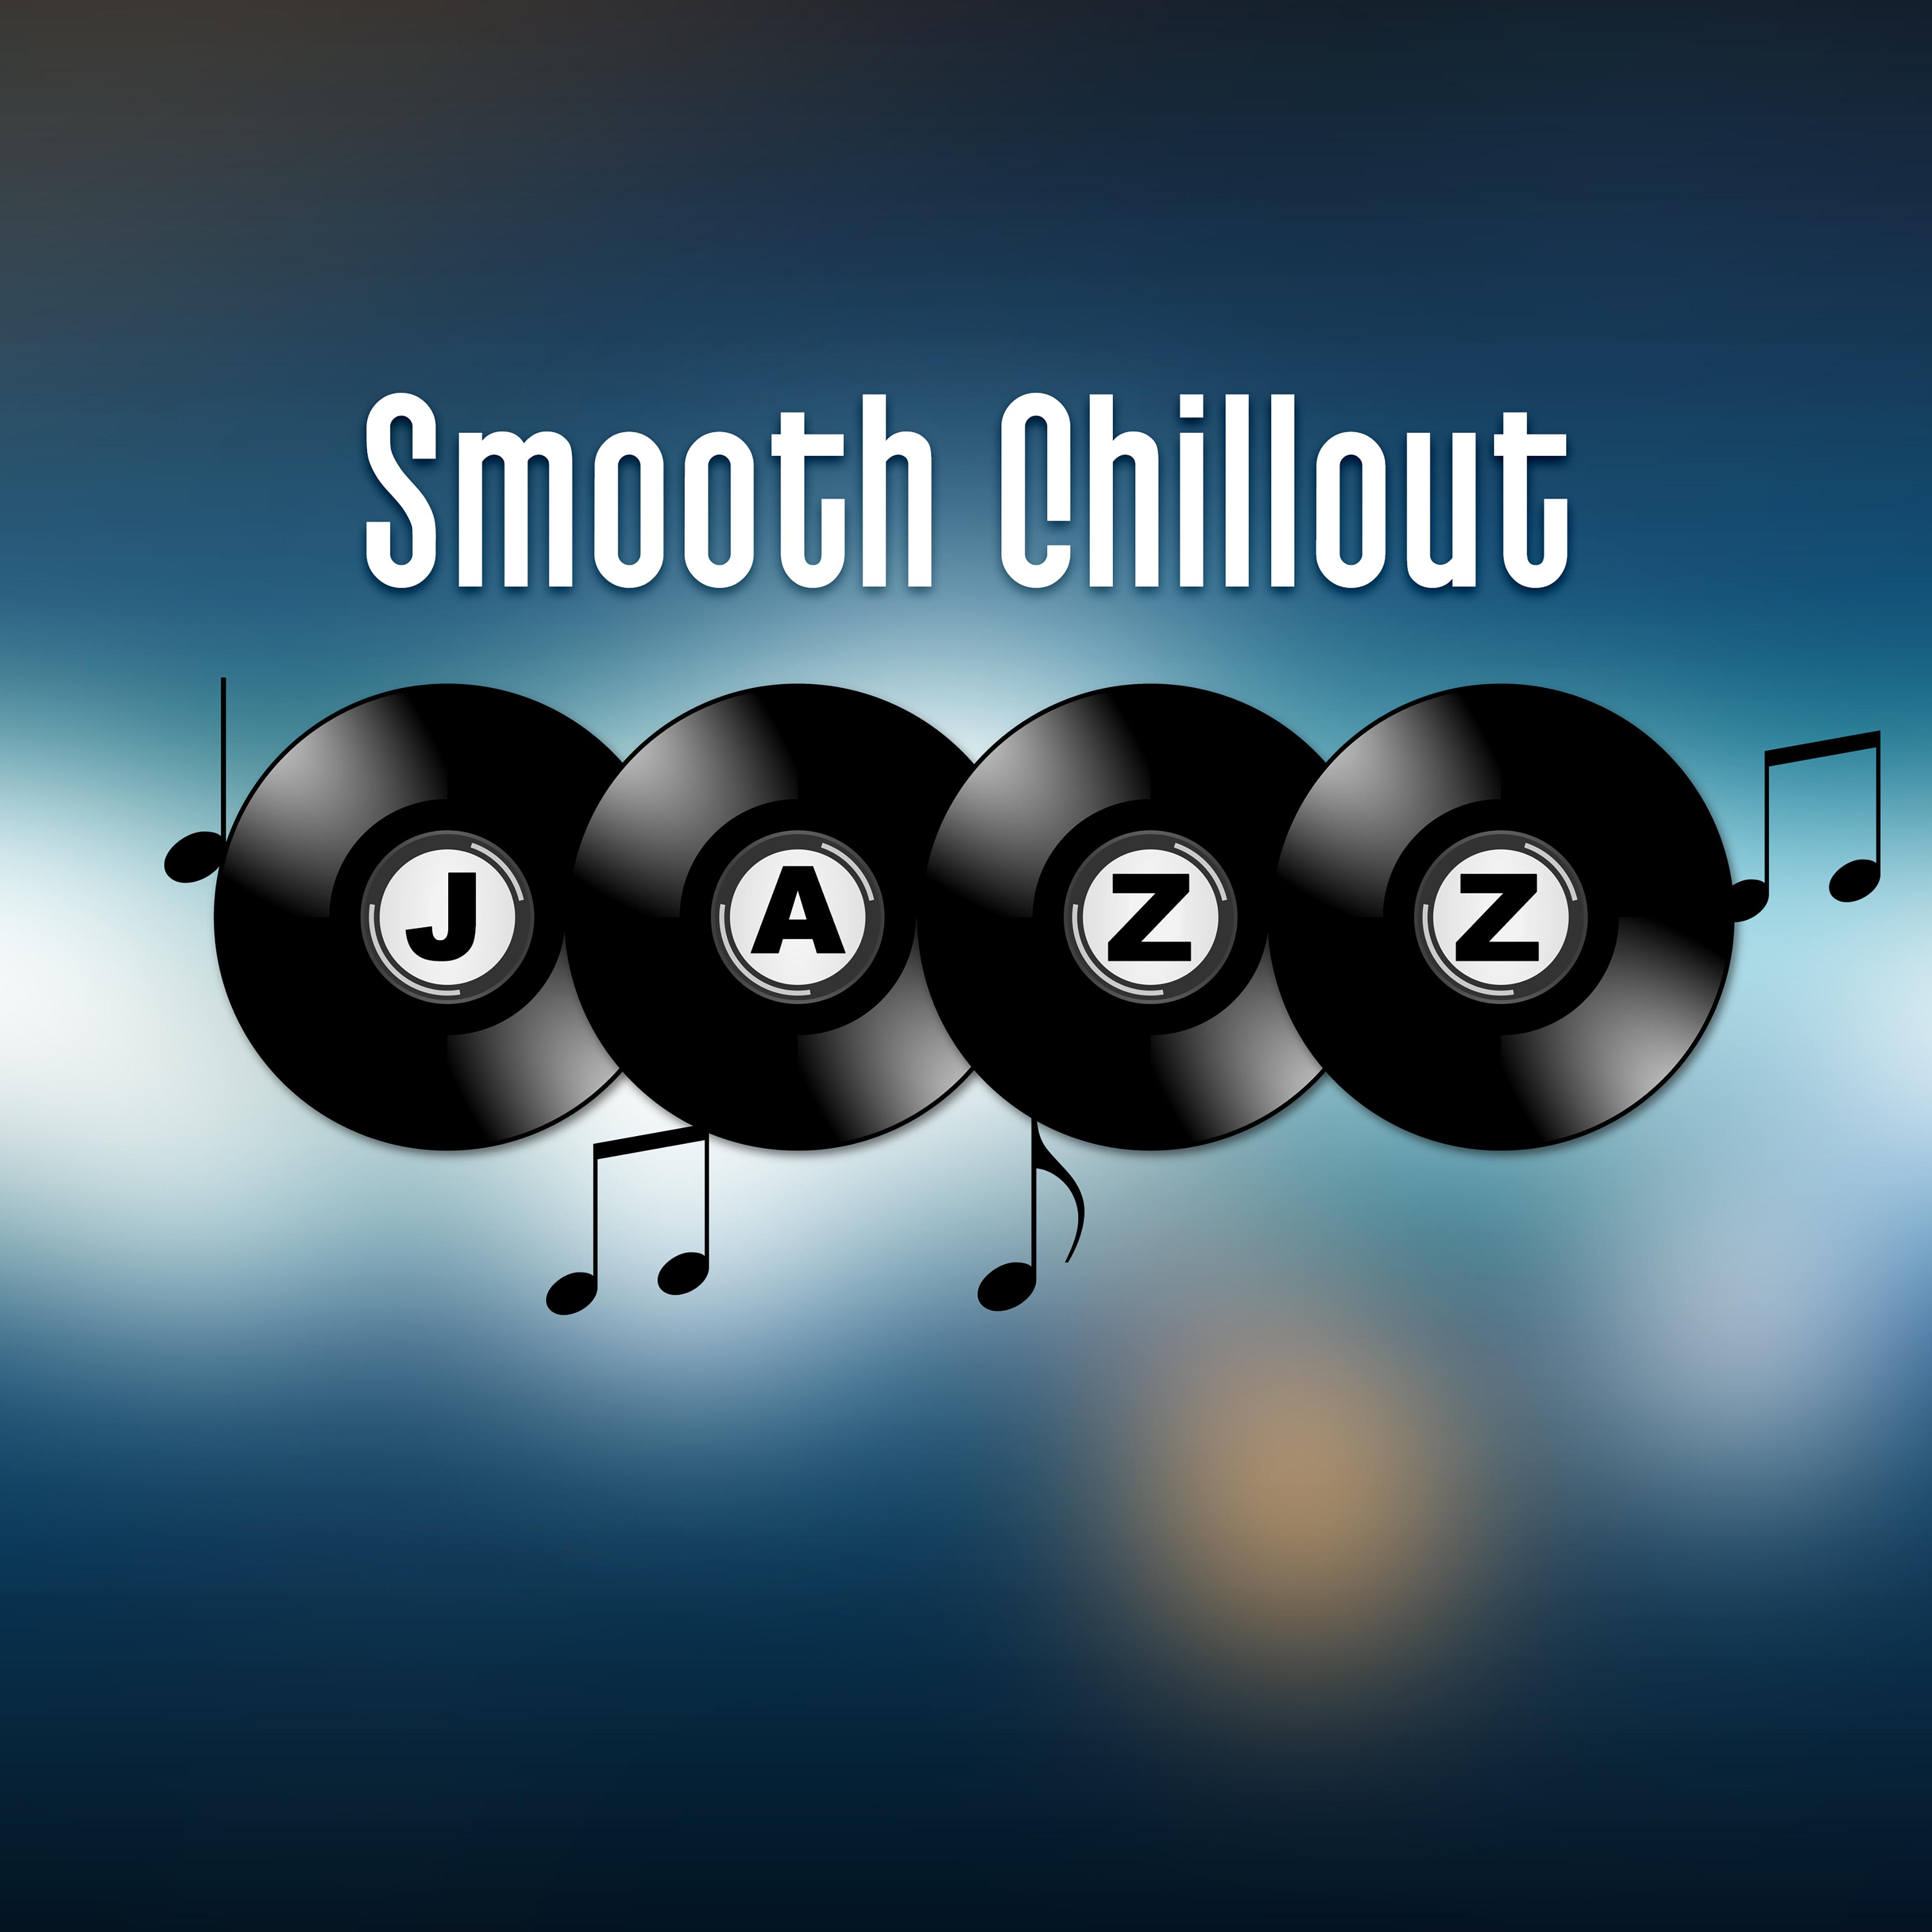 Smooth Chillout Jazz  Restaurant Music, Relaxation Time with Family, Soothing Piano, Smooth Jazz, Cafe Time